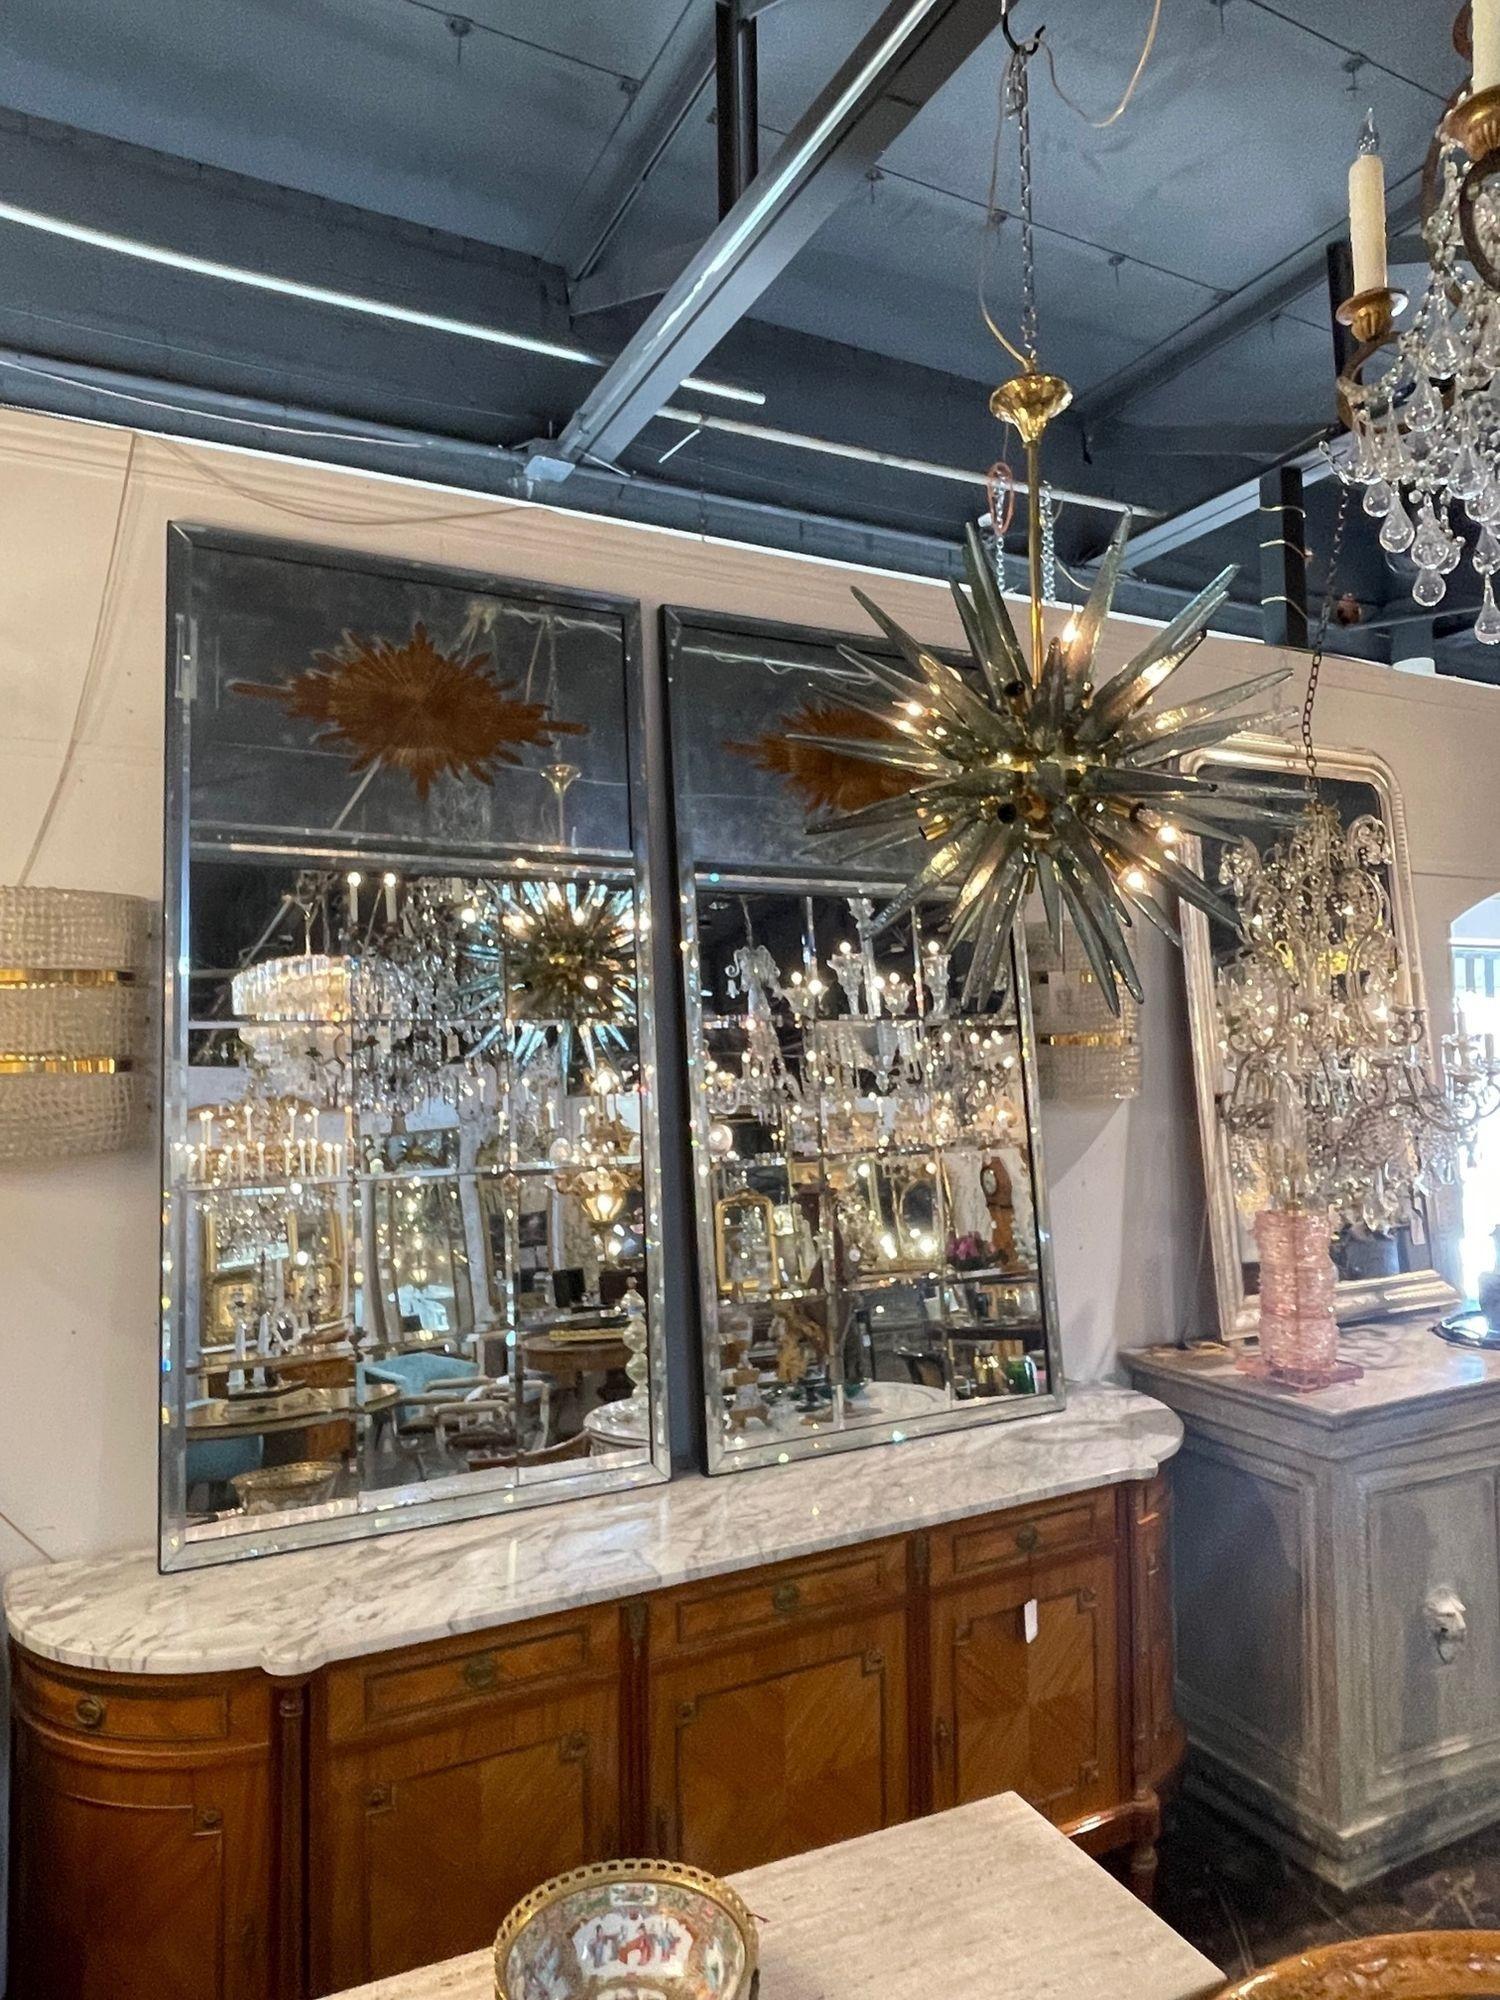 Gorgeous large scale pair of French Jansen style Eglomise sunburst Trumeau mirrors with beveled glass. This beautiful technique gives these a lot of depth. A stylish pair that creates a huge impact! Amazing!